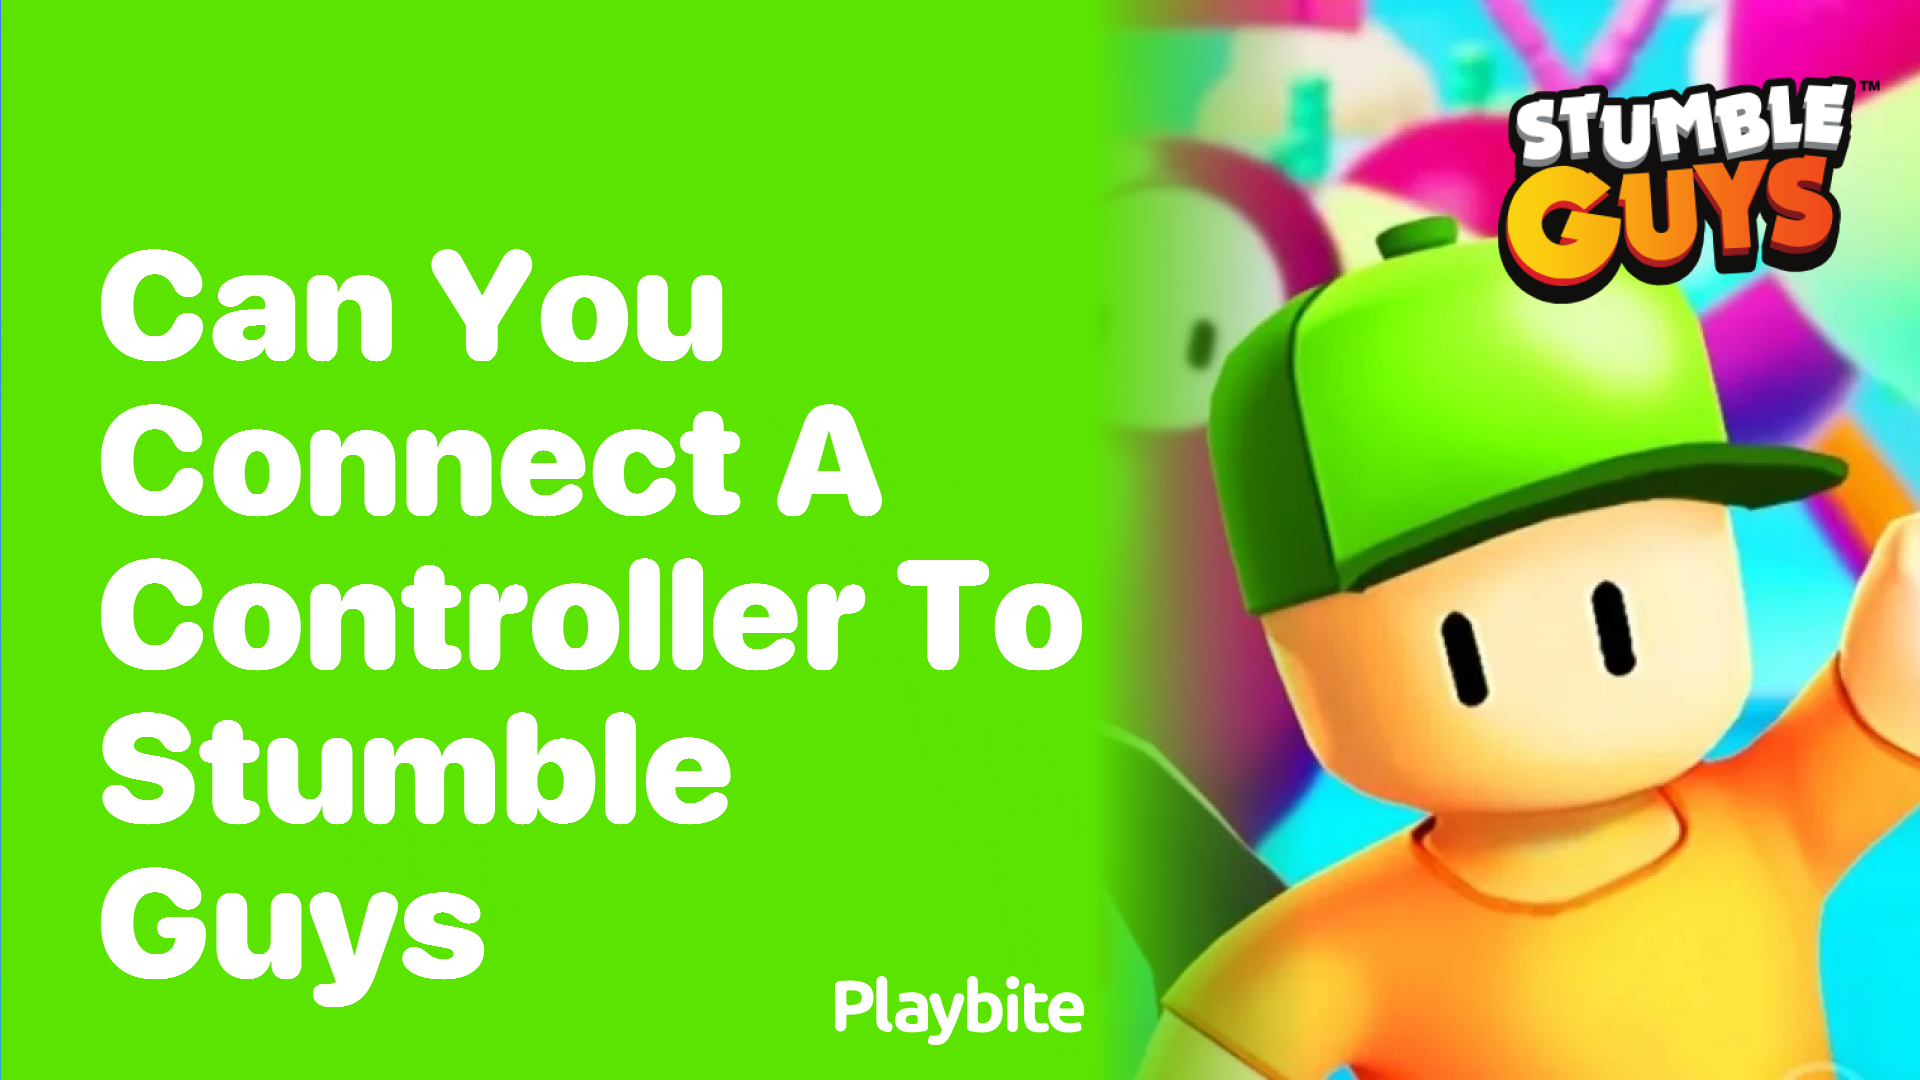 Can You Connect a Controller to Stumble Guys?